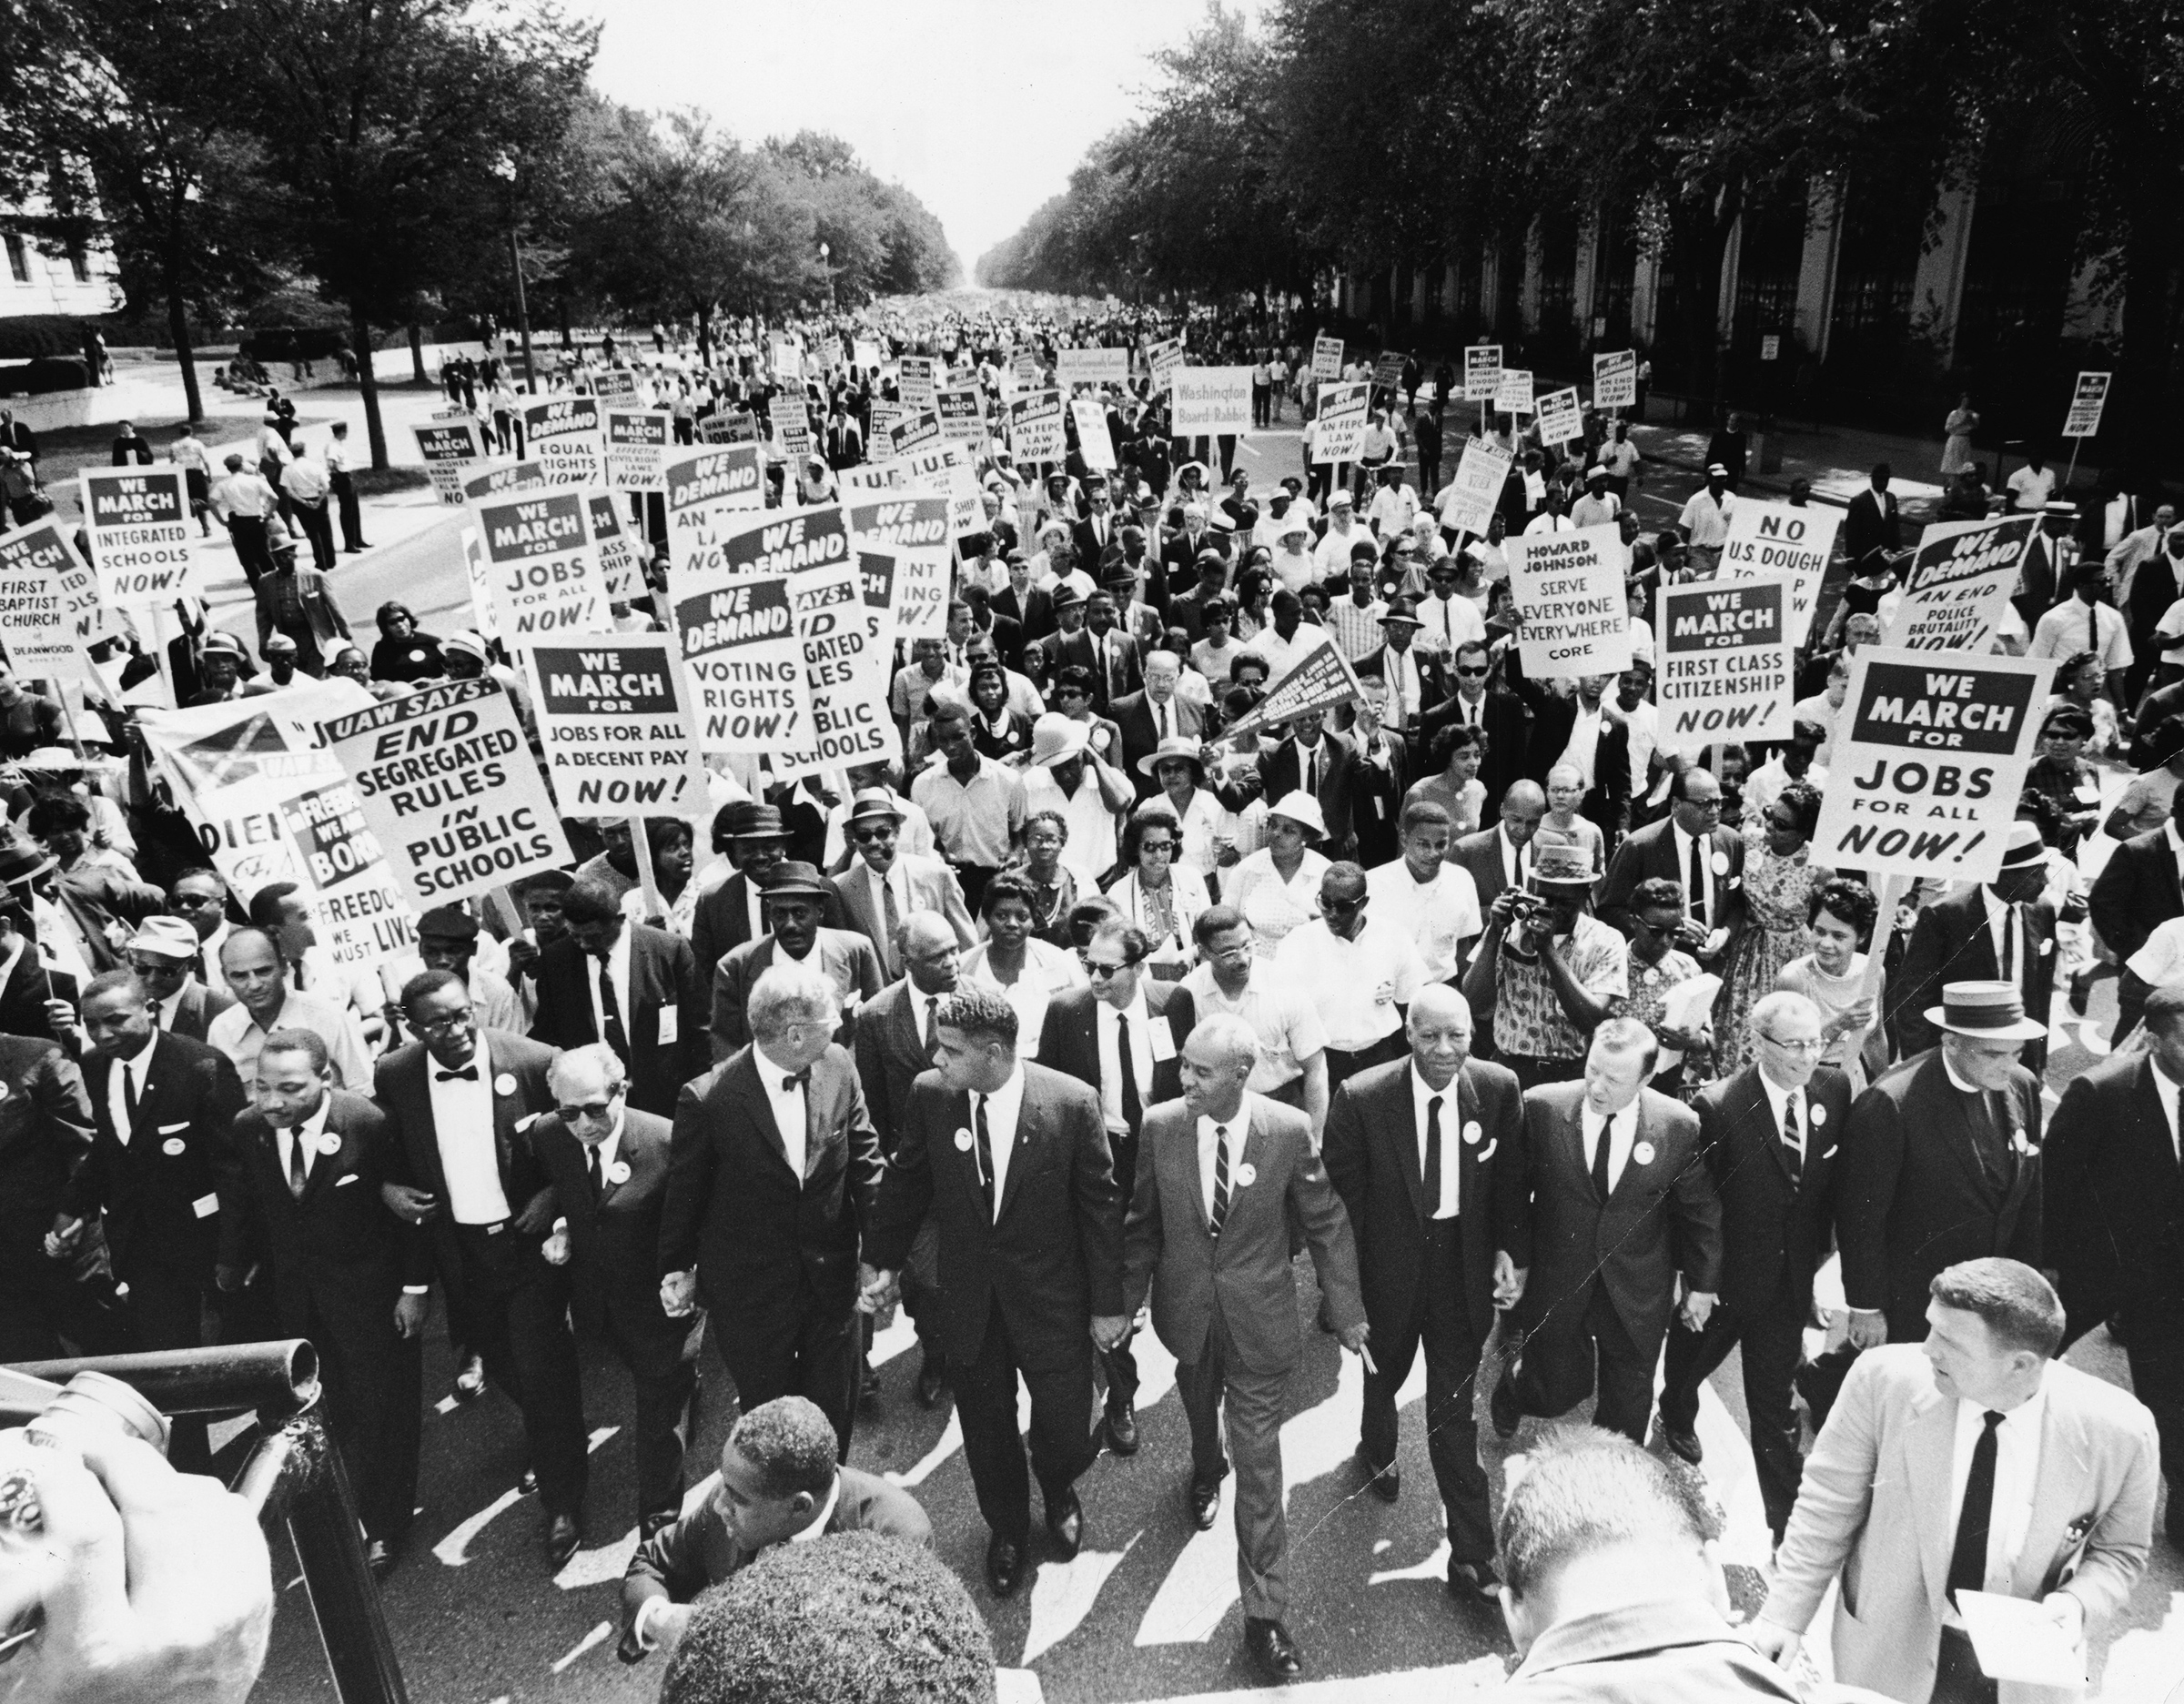 Civil rights leaders including James Meredith, Martin Luther King, Jr., Roy Wilkins, A. Phillip Randolph, and Walther Reuther, hold hands as they lead a crowd at the March on Washington in Washington D.C., Aug. 28, 1963